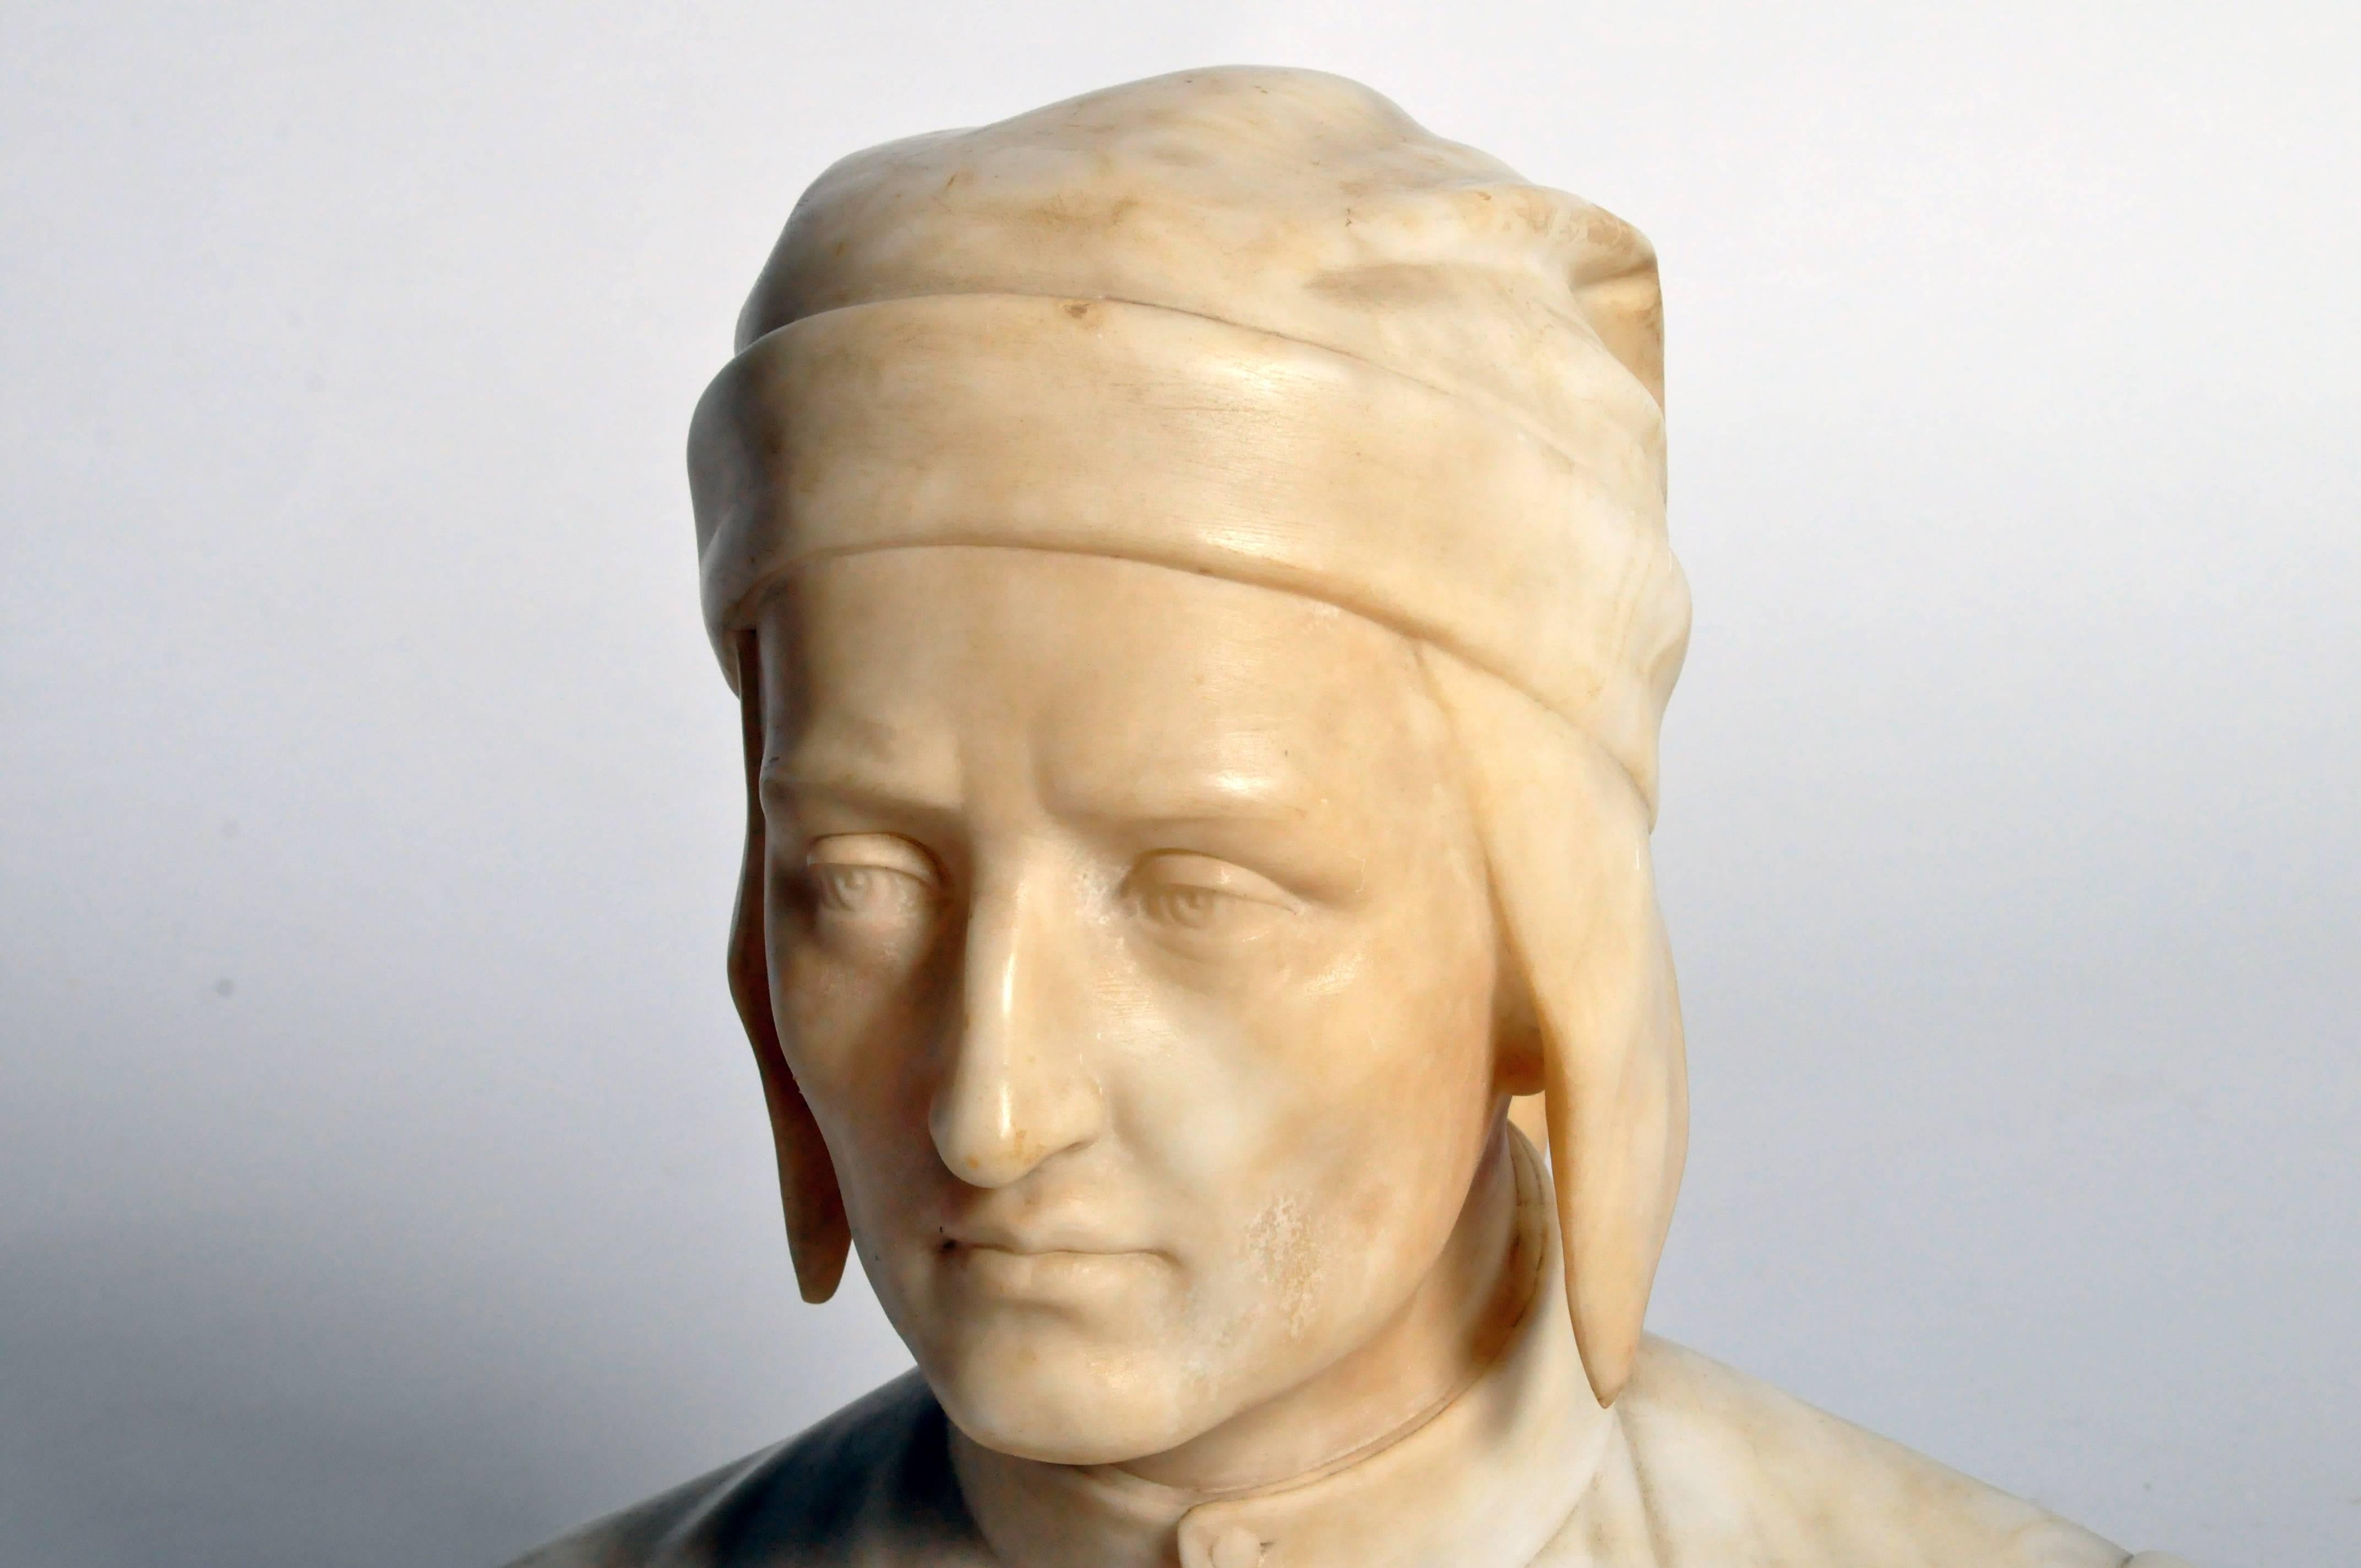 The Italian philosopher, scholar and poet is depicted wearing his traditional robe and cap in exquisitely carved detail.